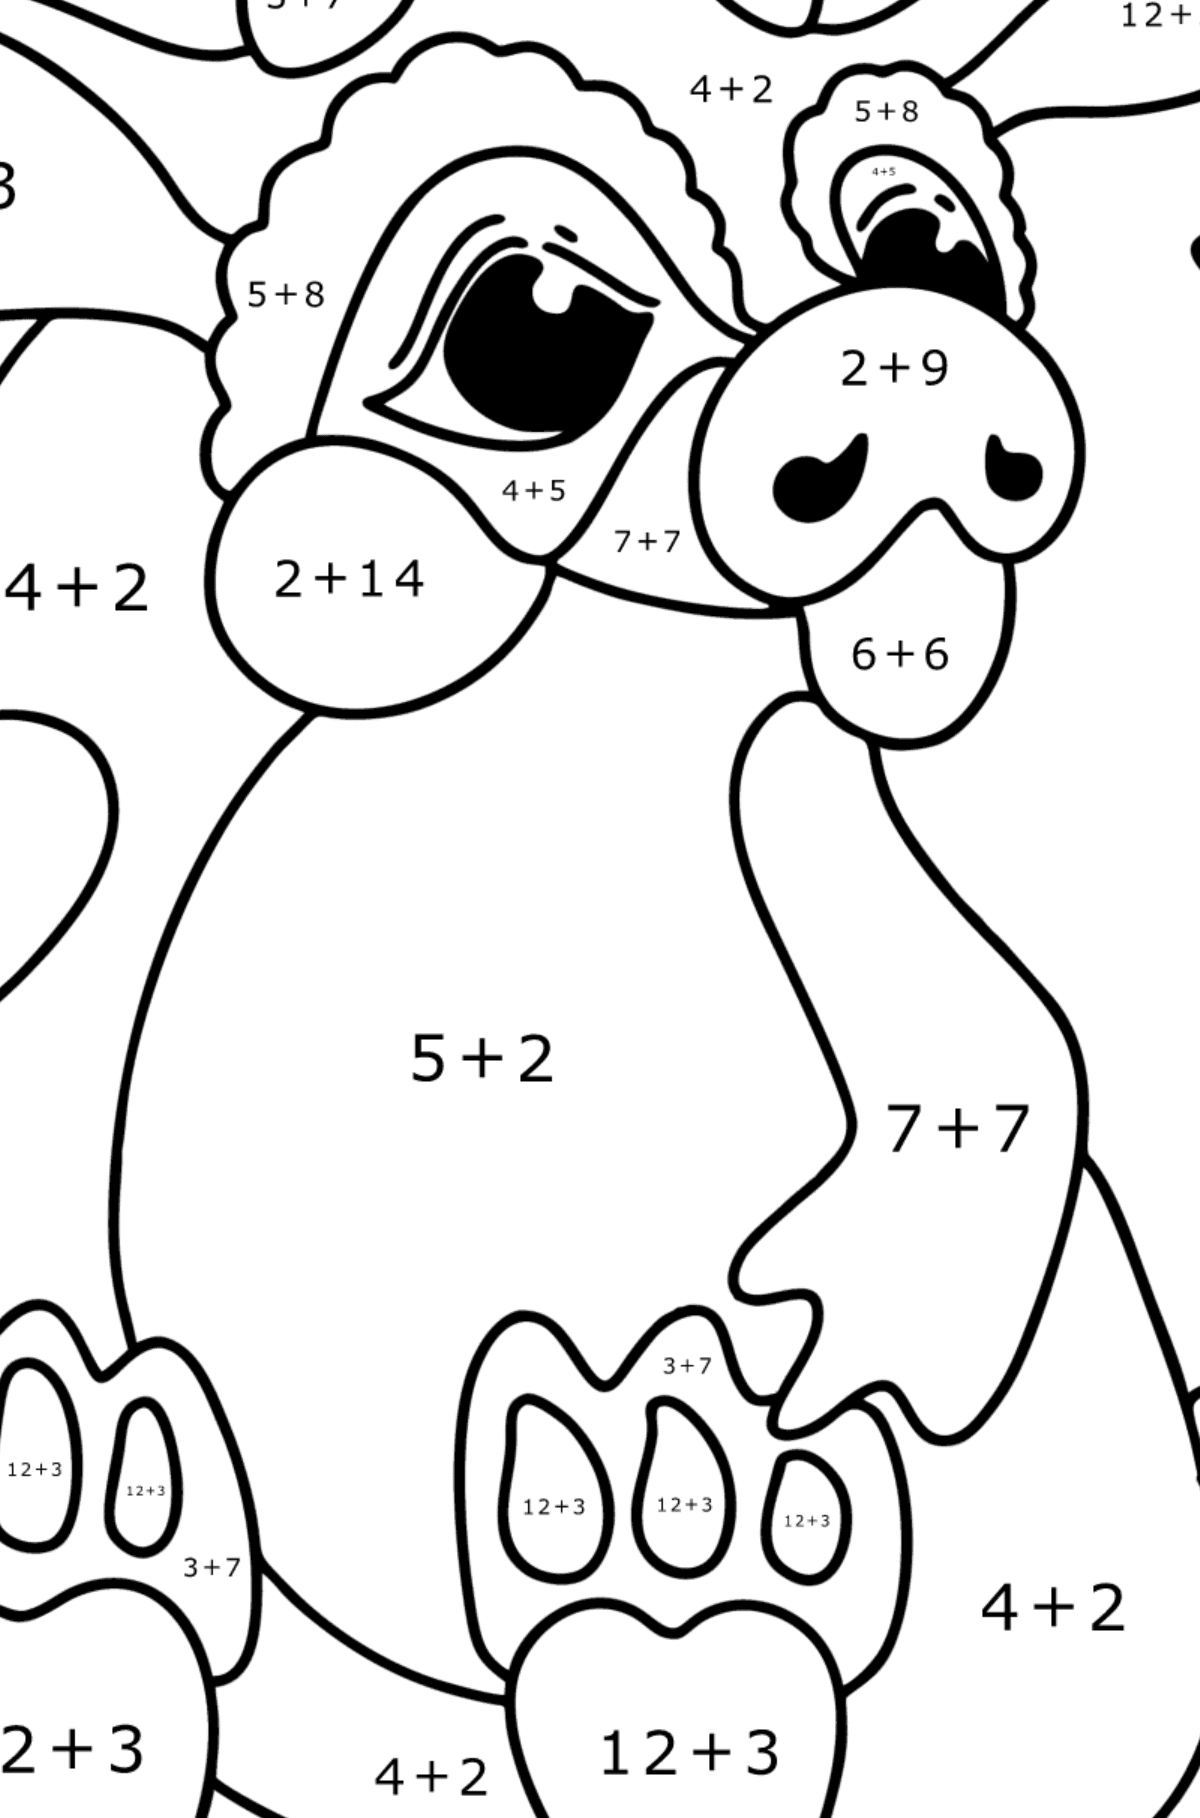 Dreamy dragon coloring page - Math Coloring - Addition for Kids